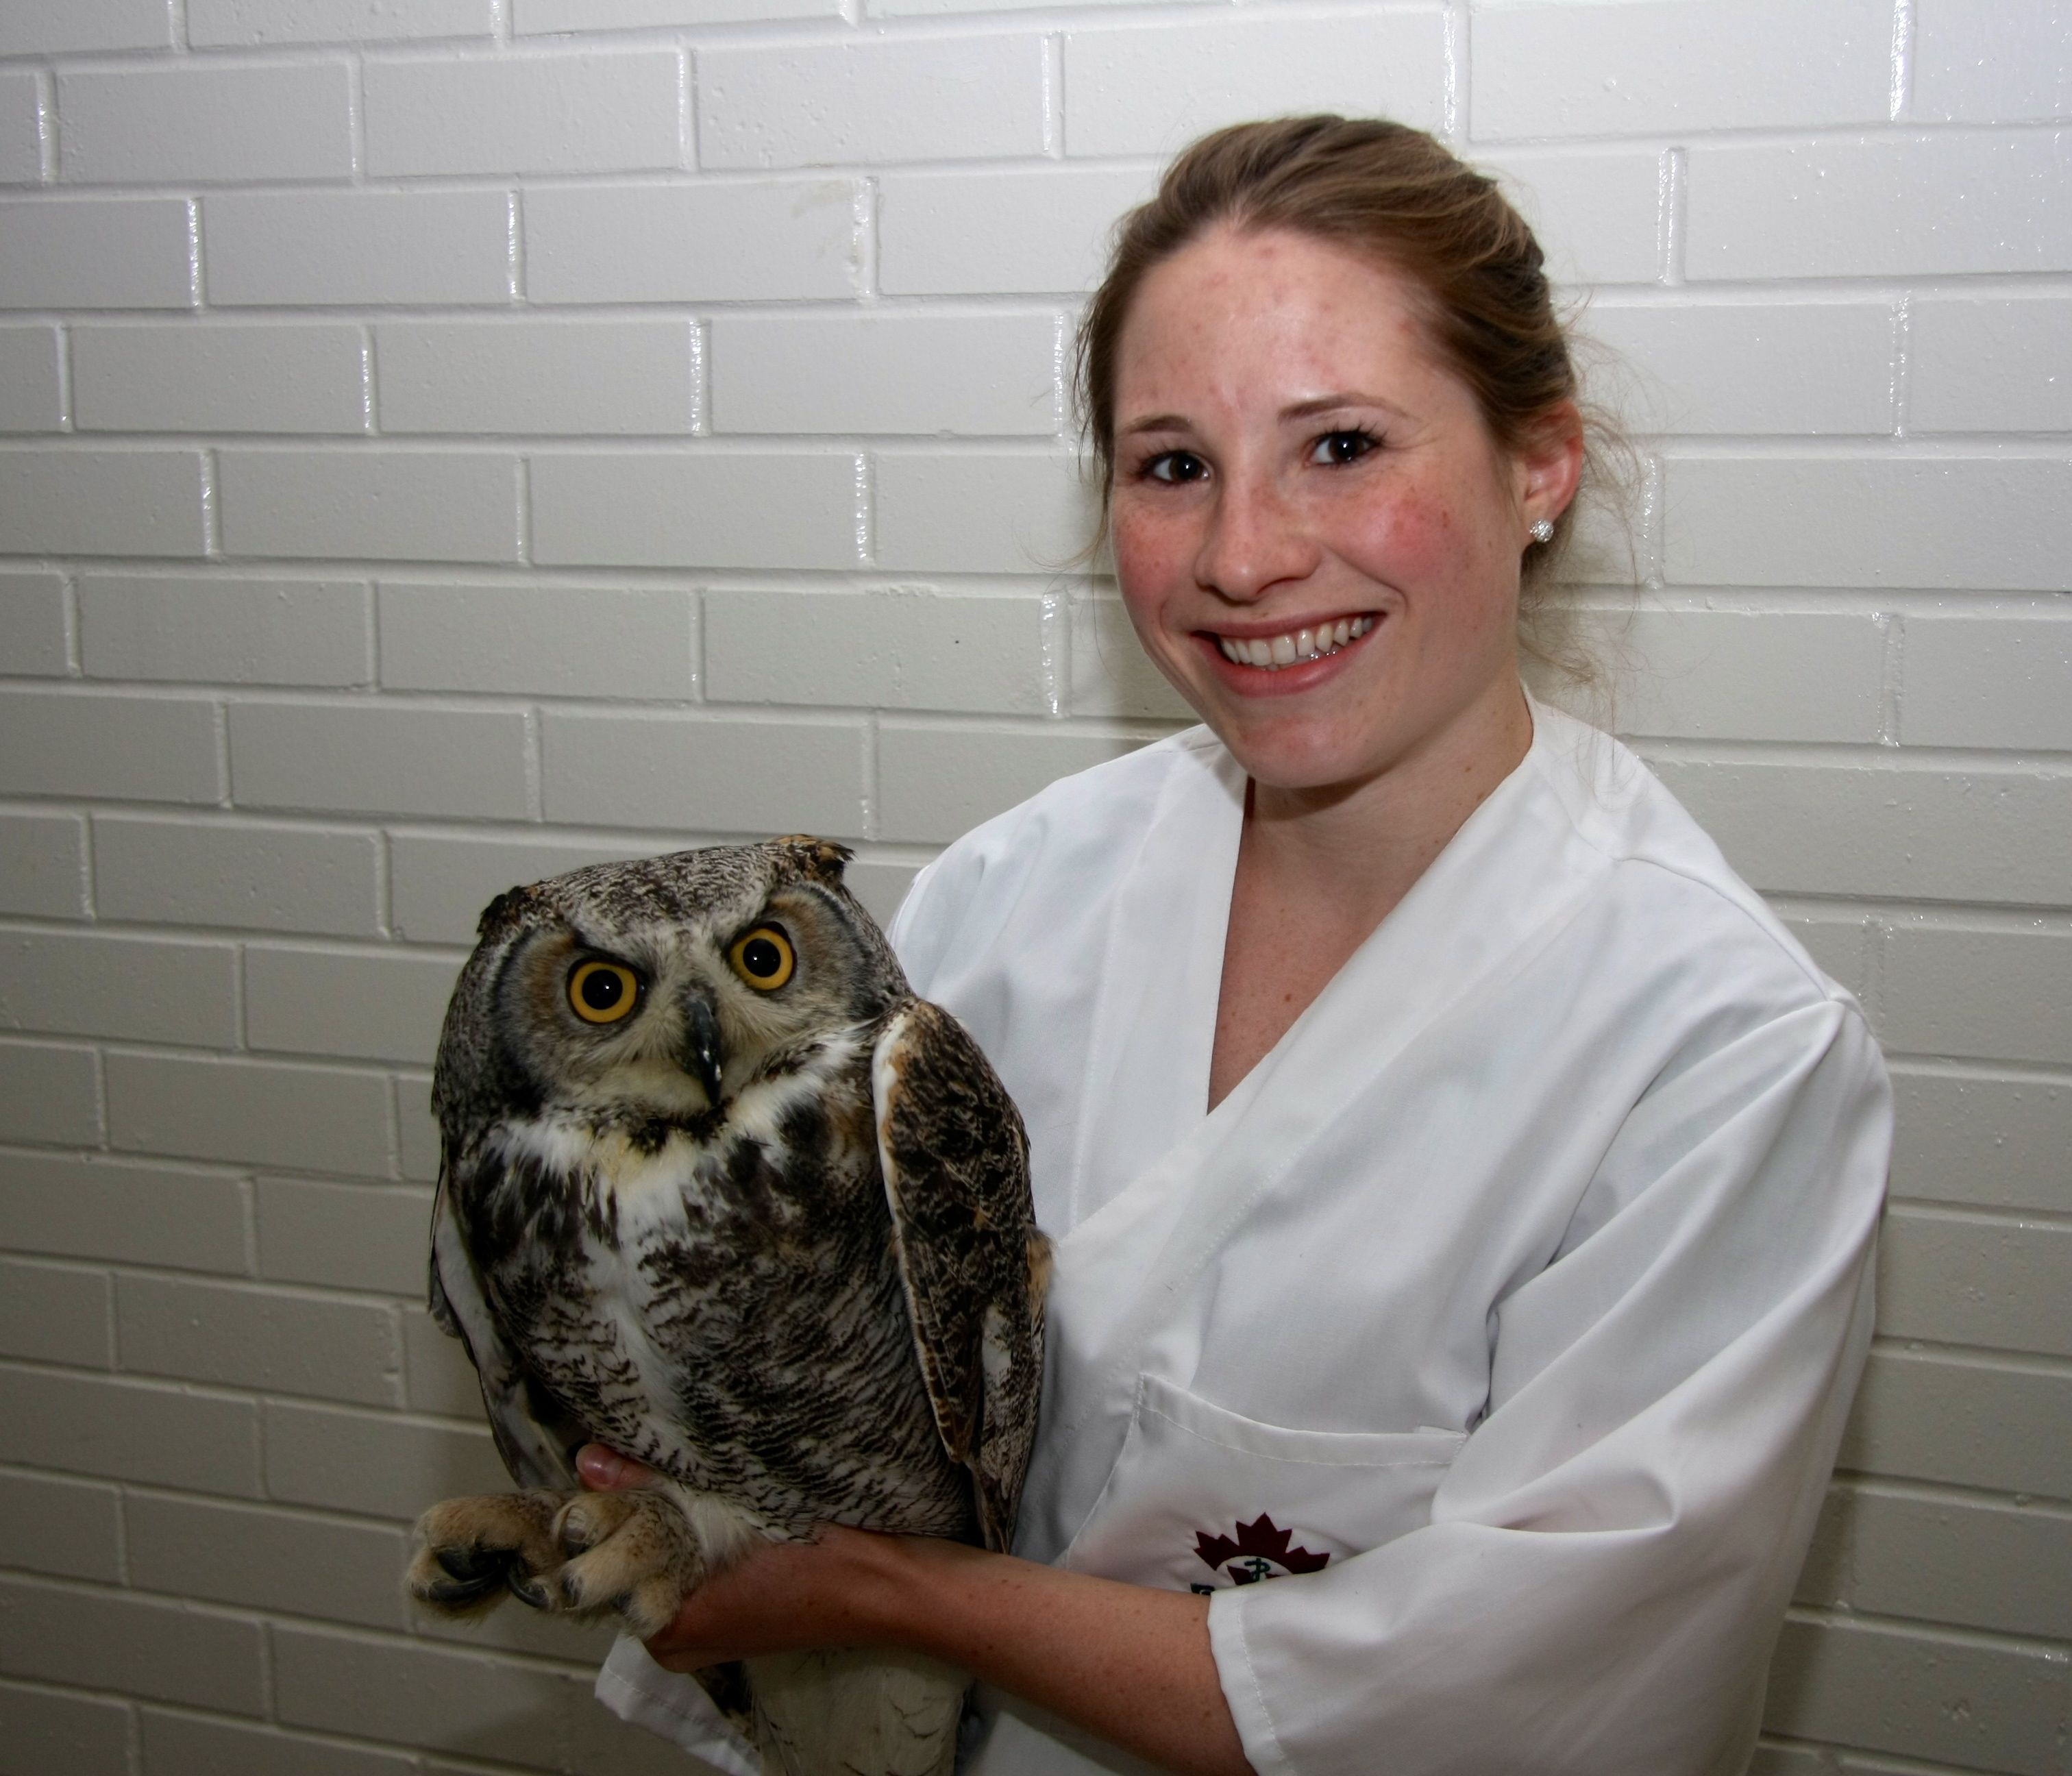 WEAMS president Michelle Whitehead poses with Voldemort, a great horned owl receiving treatment at the WCVM. Photo: Melissa Cavanagh.